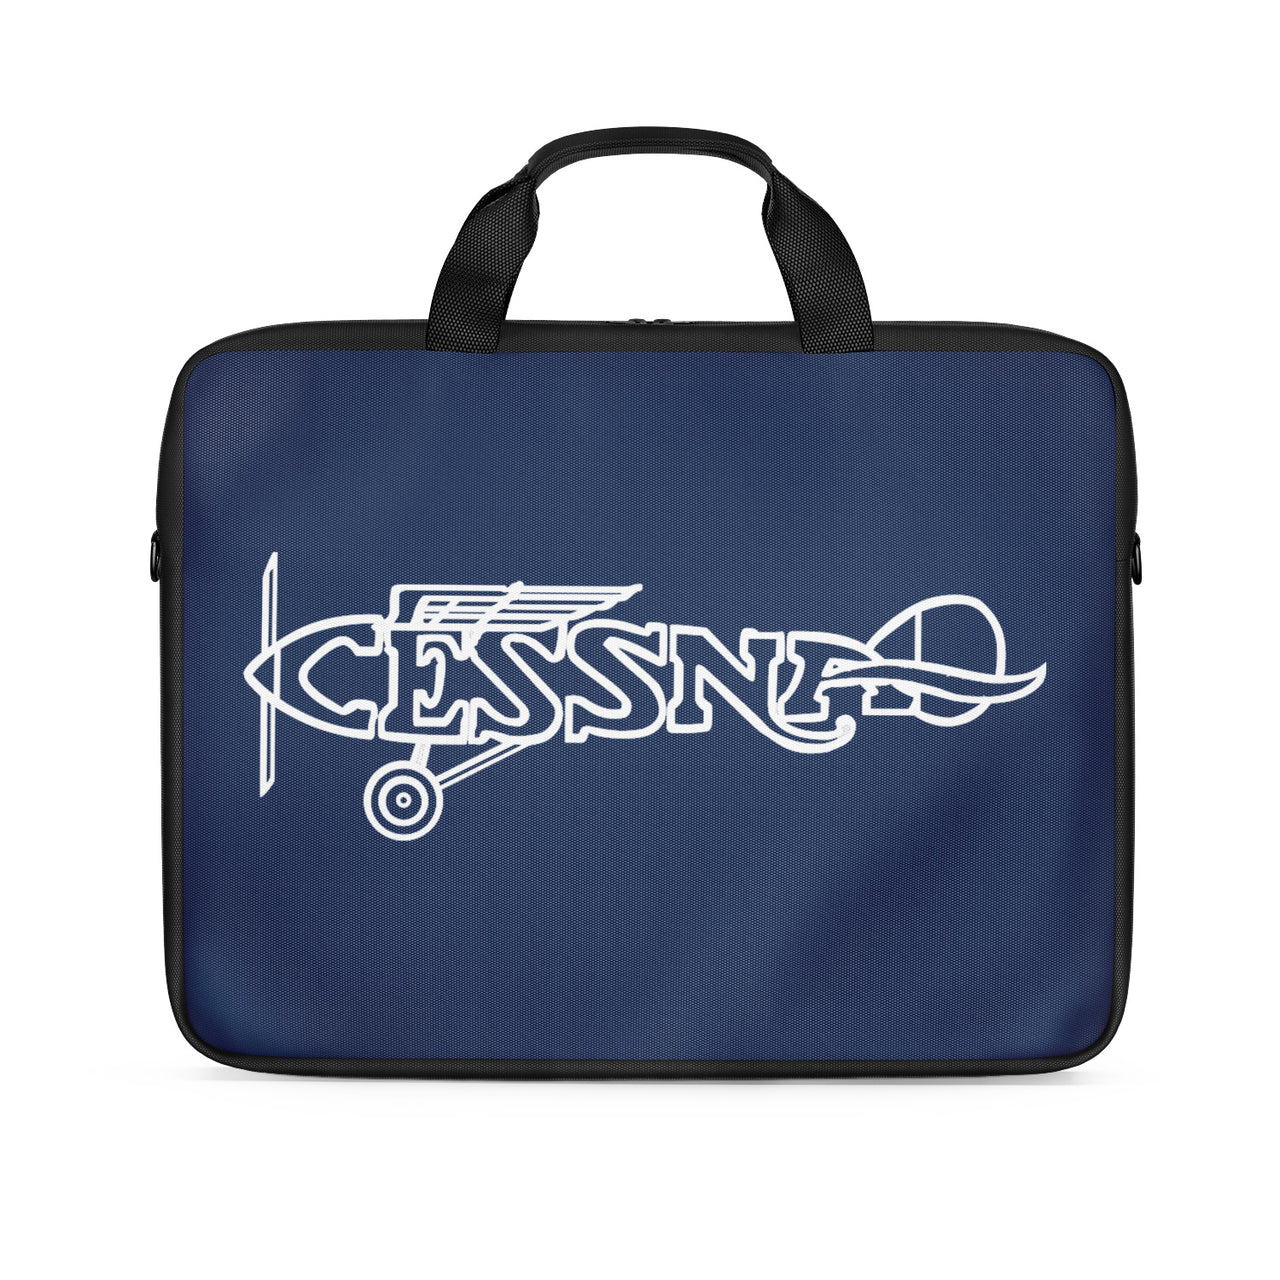 Special Cessna Text Designed Laptop & Tablet Bags